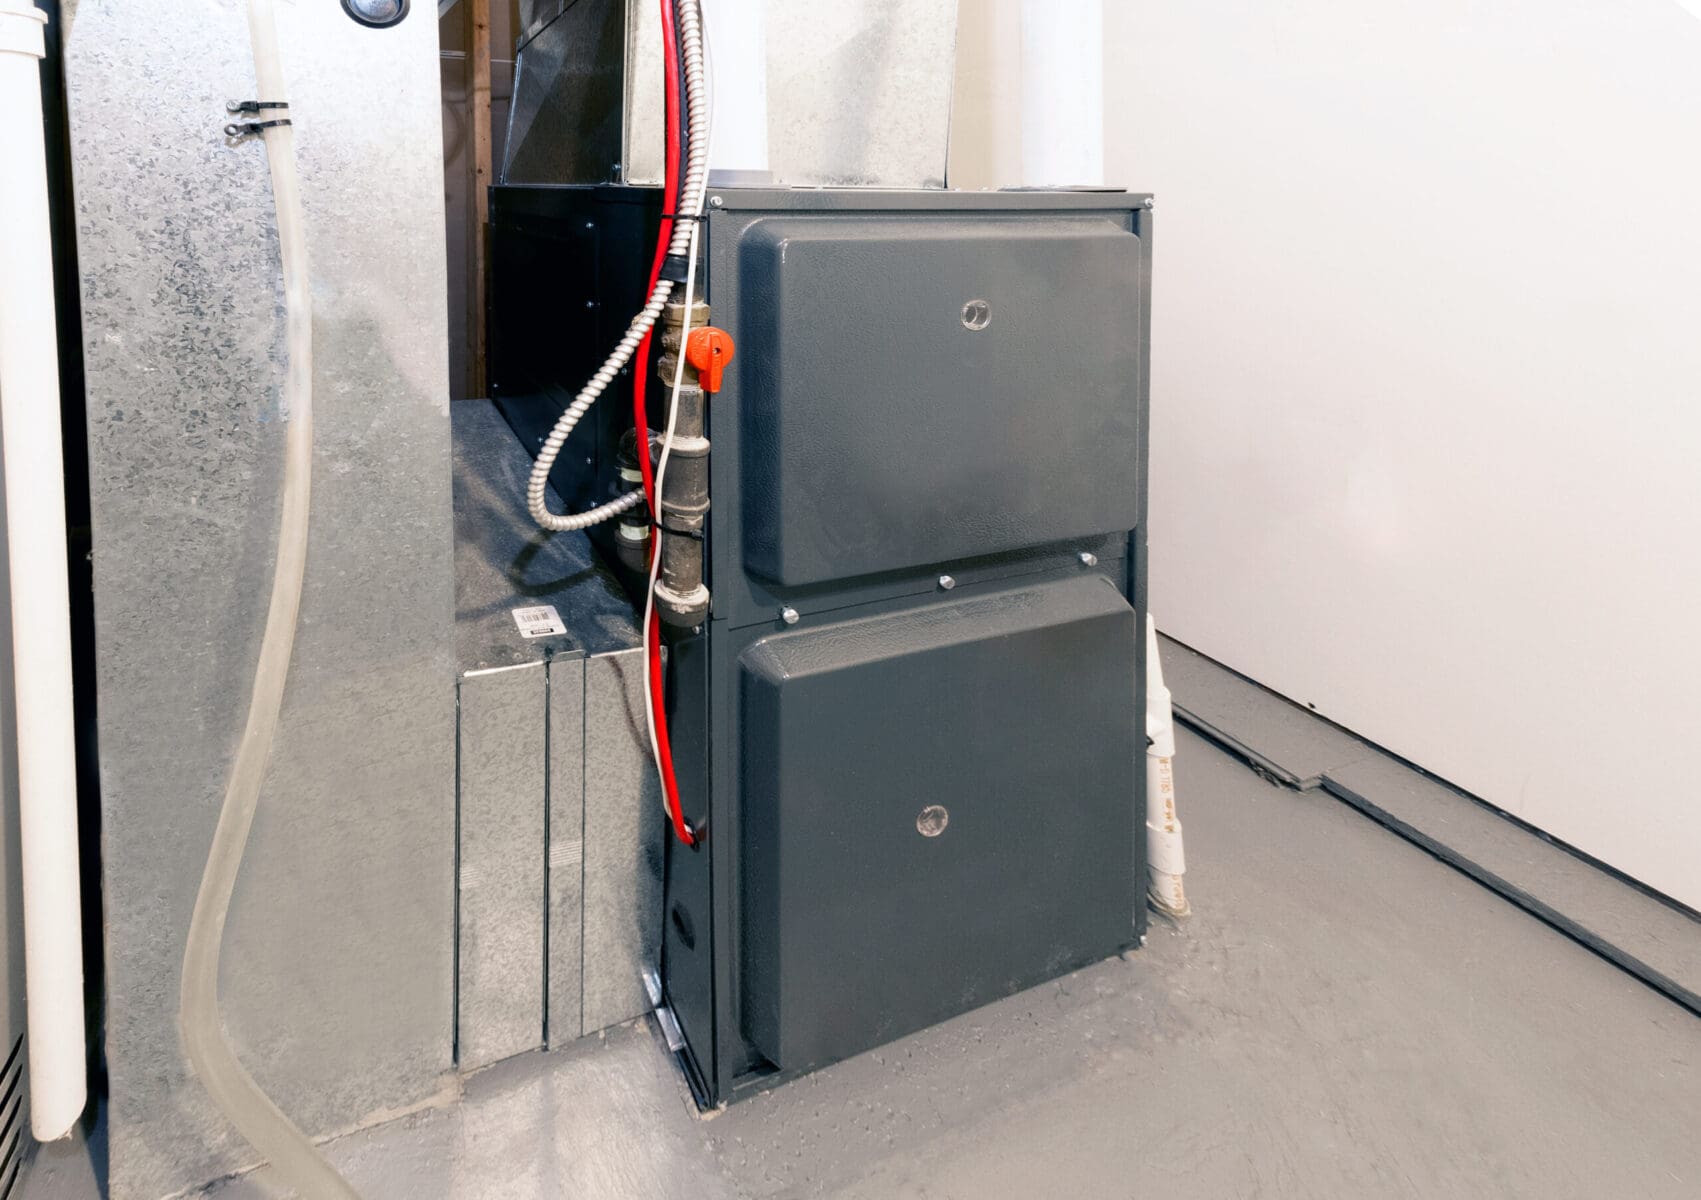 Electric furnace installed in home’s basement